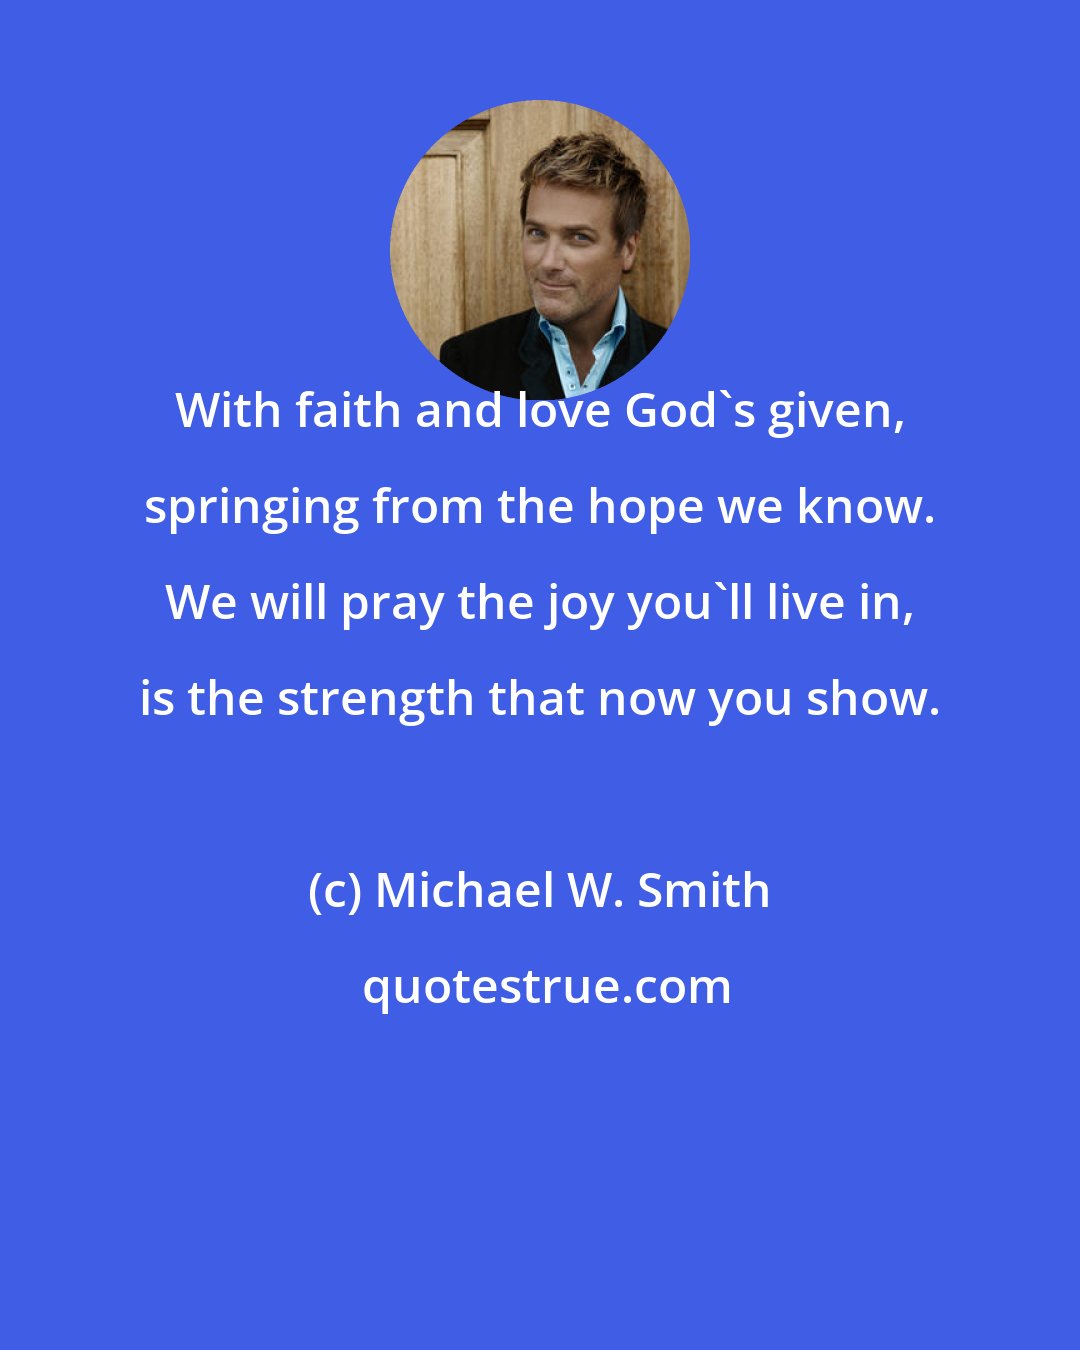 Michael W. Smith: With faith and love God's given, springing from the hope we know. We will pray the joy you'll live in, is the strength that now you show.